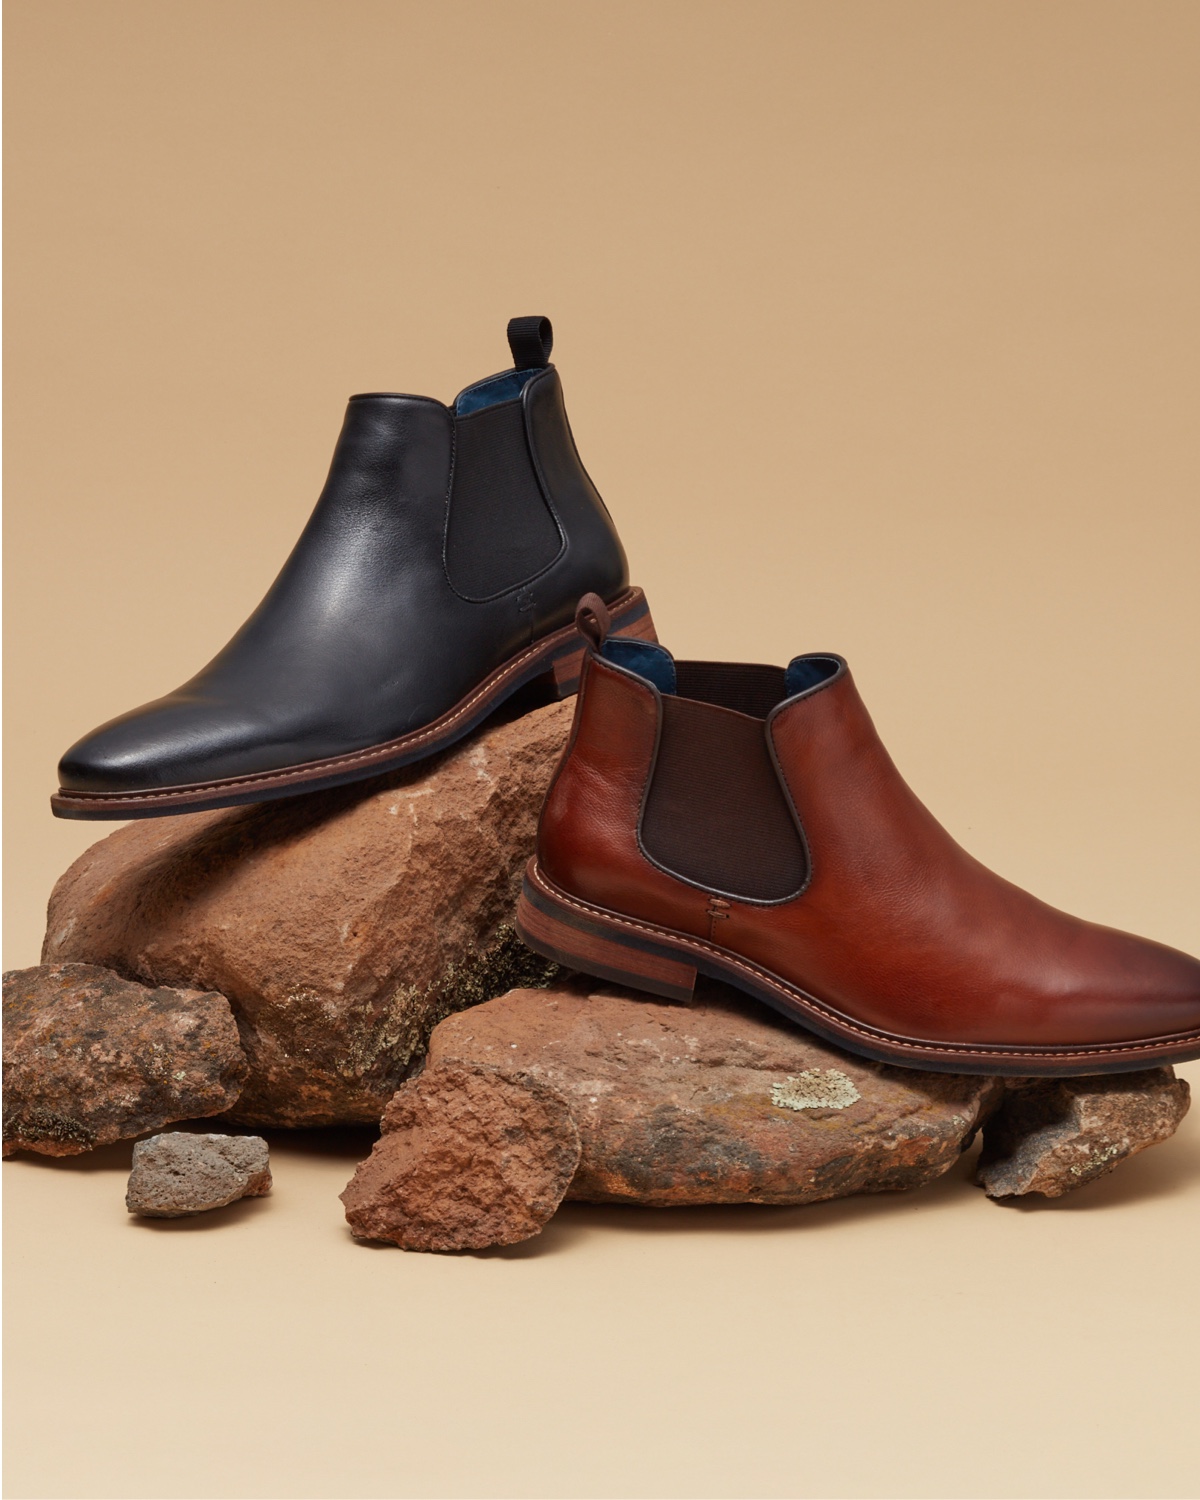 black boot and brown boot on rocks